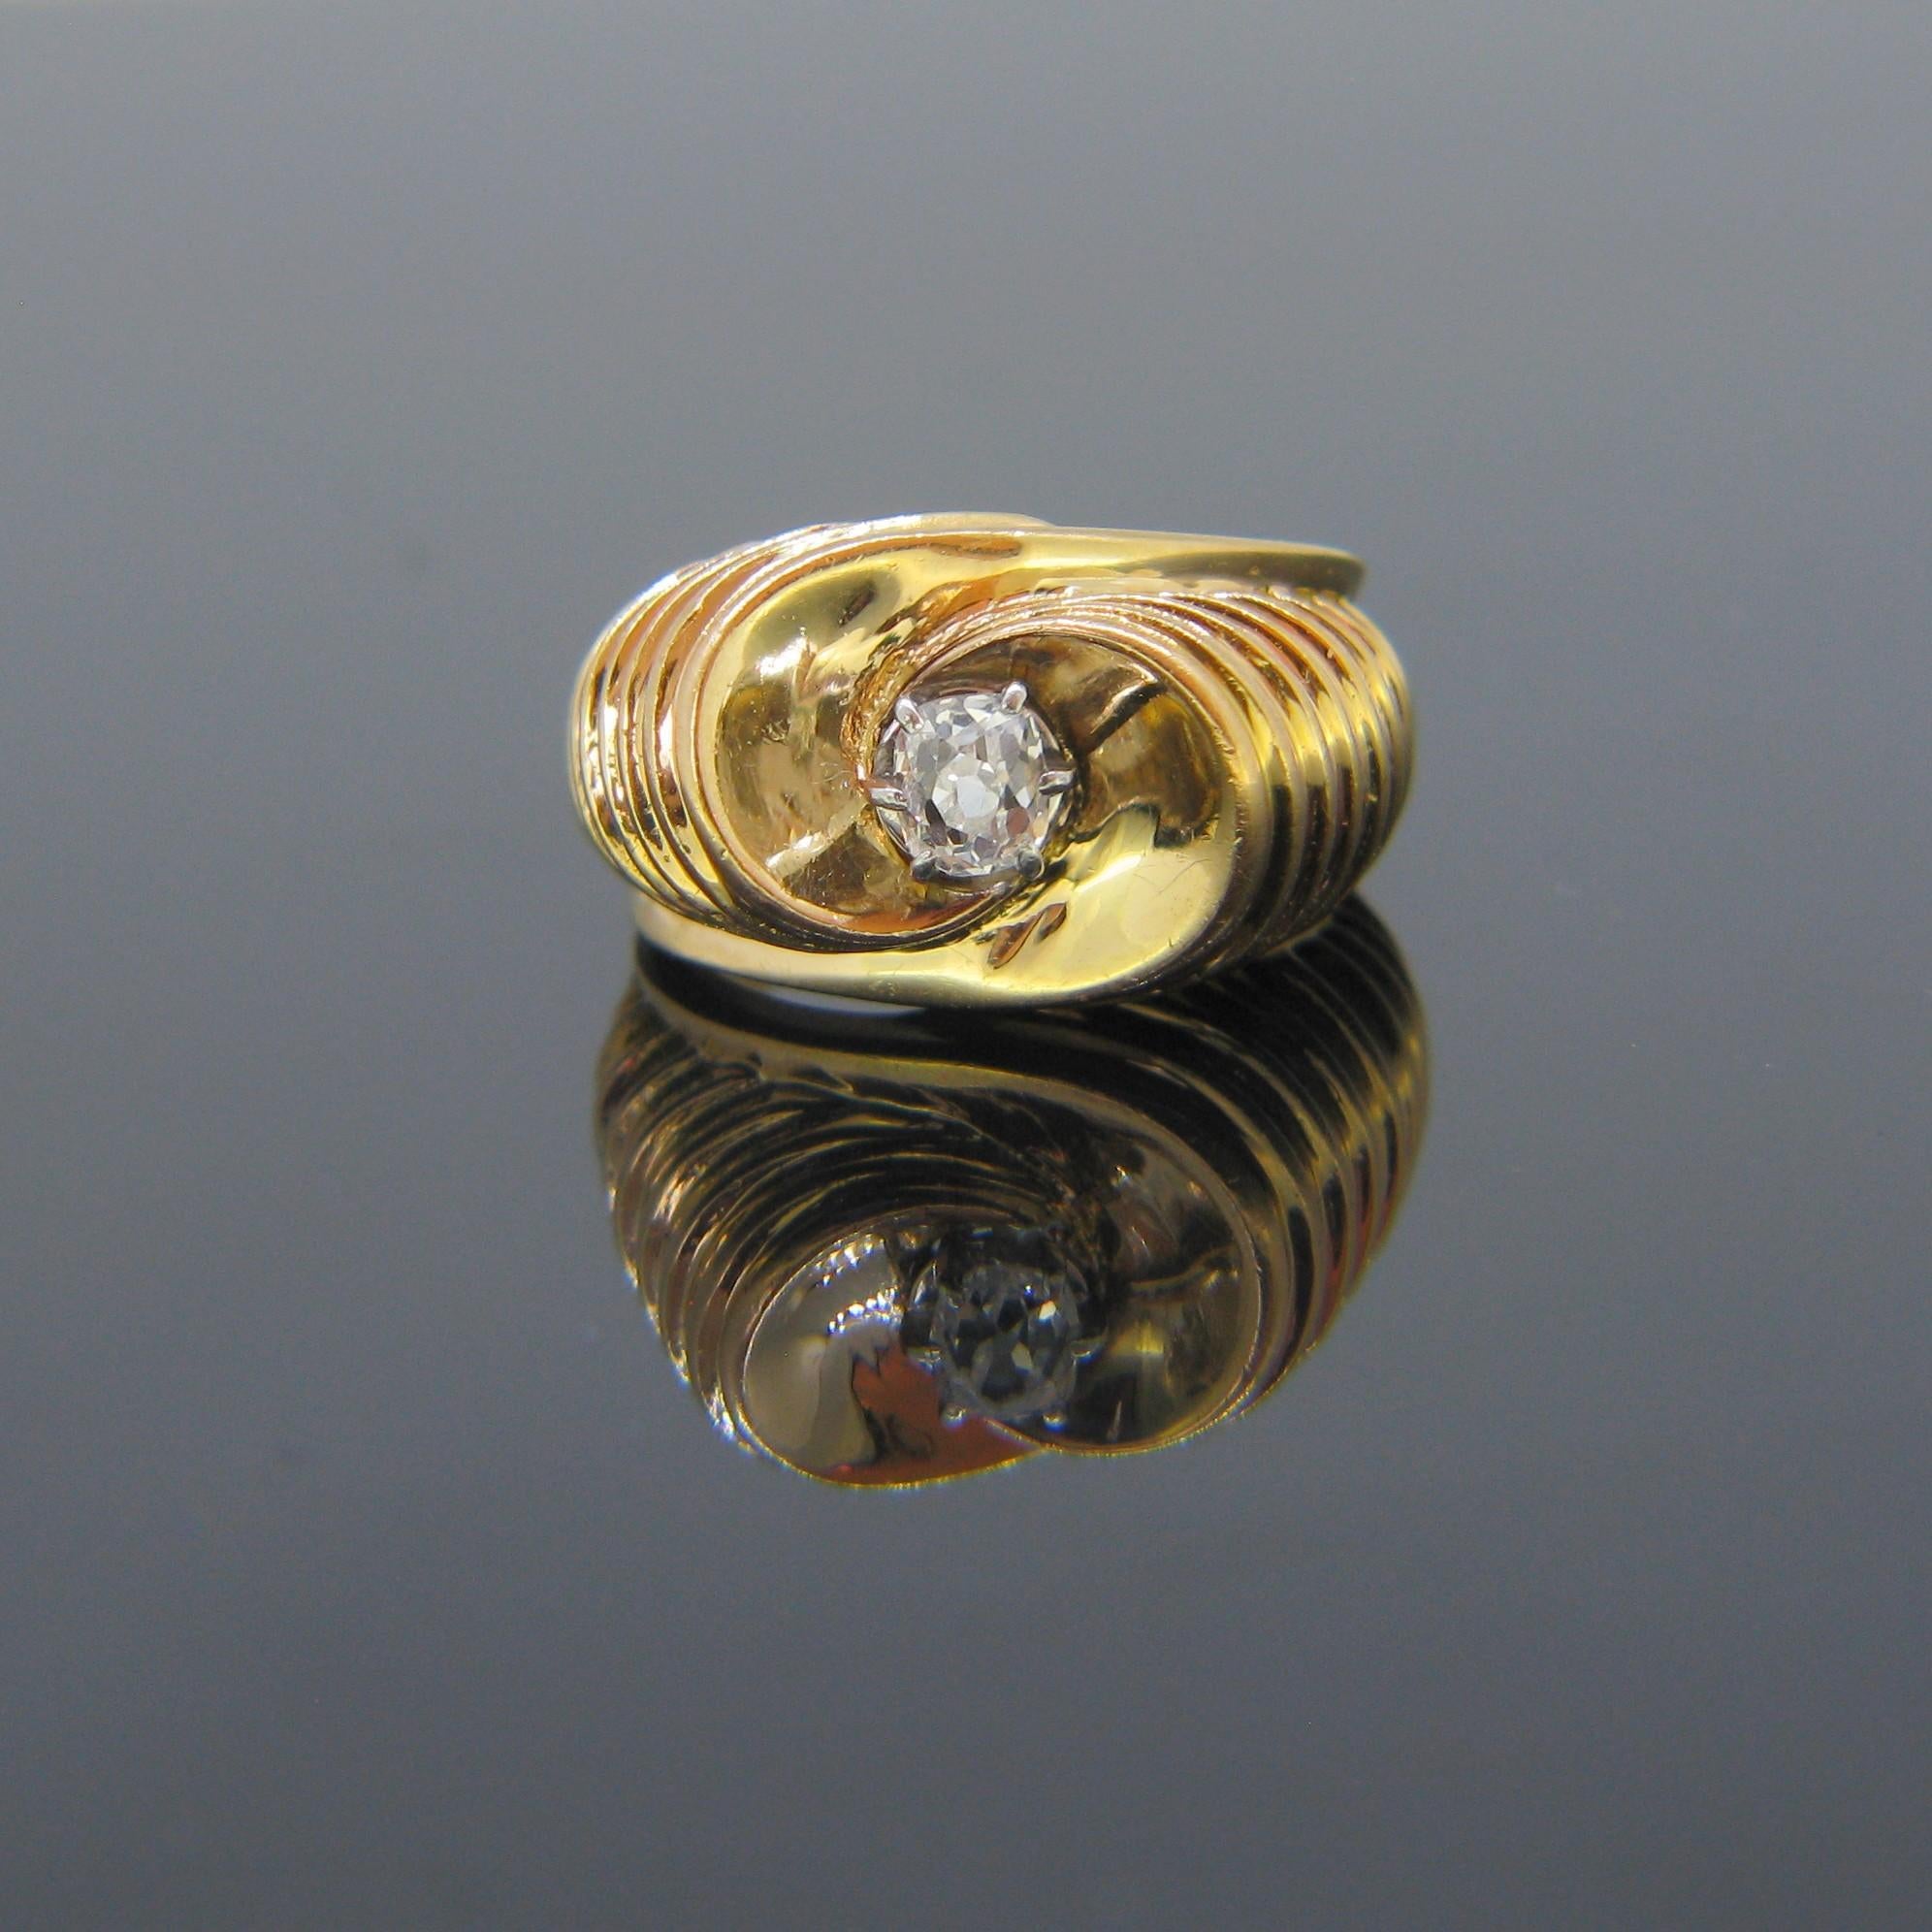 Weight:	10.88gr

Metal:		18kt Yellow Gold (tested) 
	Platinum

Stones:	1 Diamond
•	Cut:	Old Mine
•	Carat Weight:	0.40ct approx.
•	Color:	I
•	Clarity:	VS

Condition:	Very Good

Comments: 	This beautiful ring was made circa 1950. It is fully made in